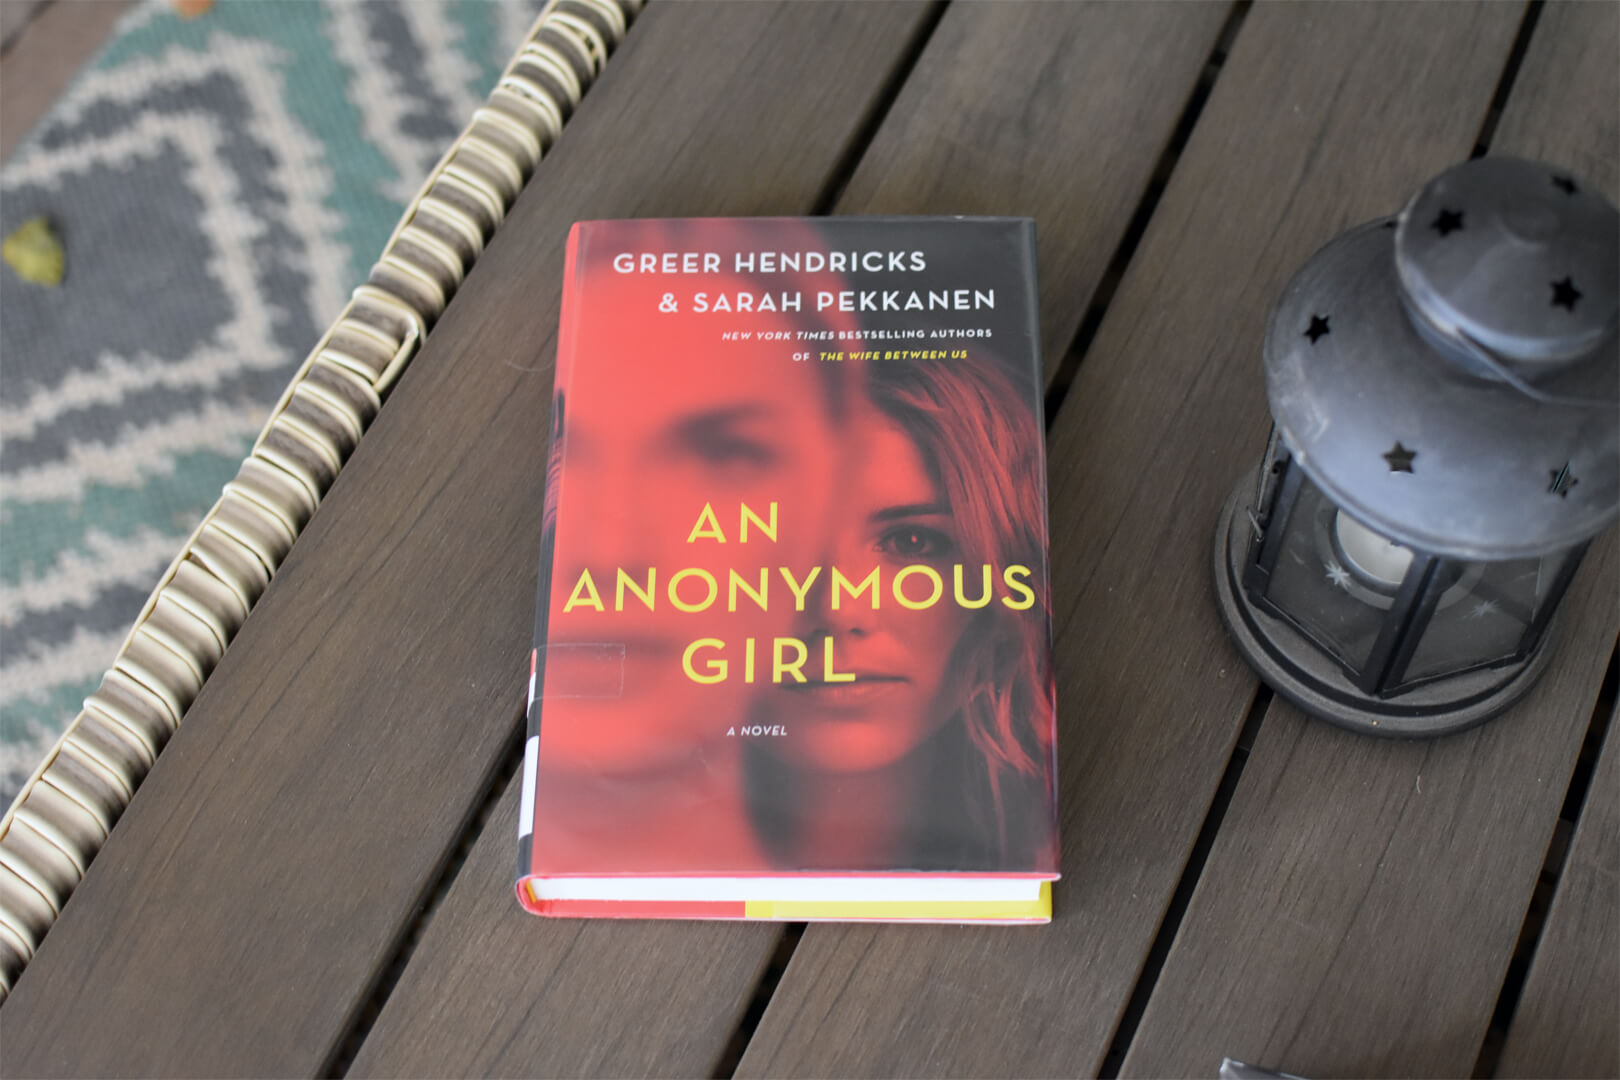 Book Club Questions for An Anonymous Girl by Greer Hendricks and Sarah Pekkanen